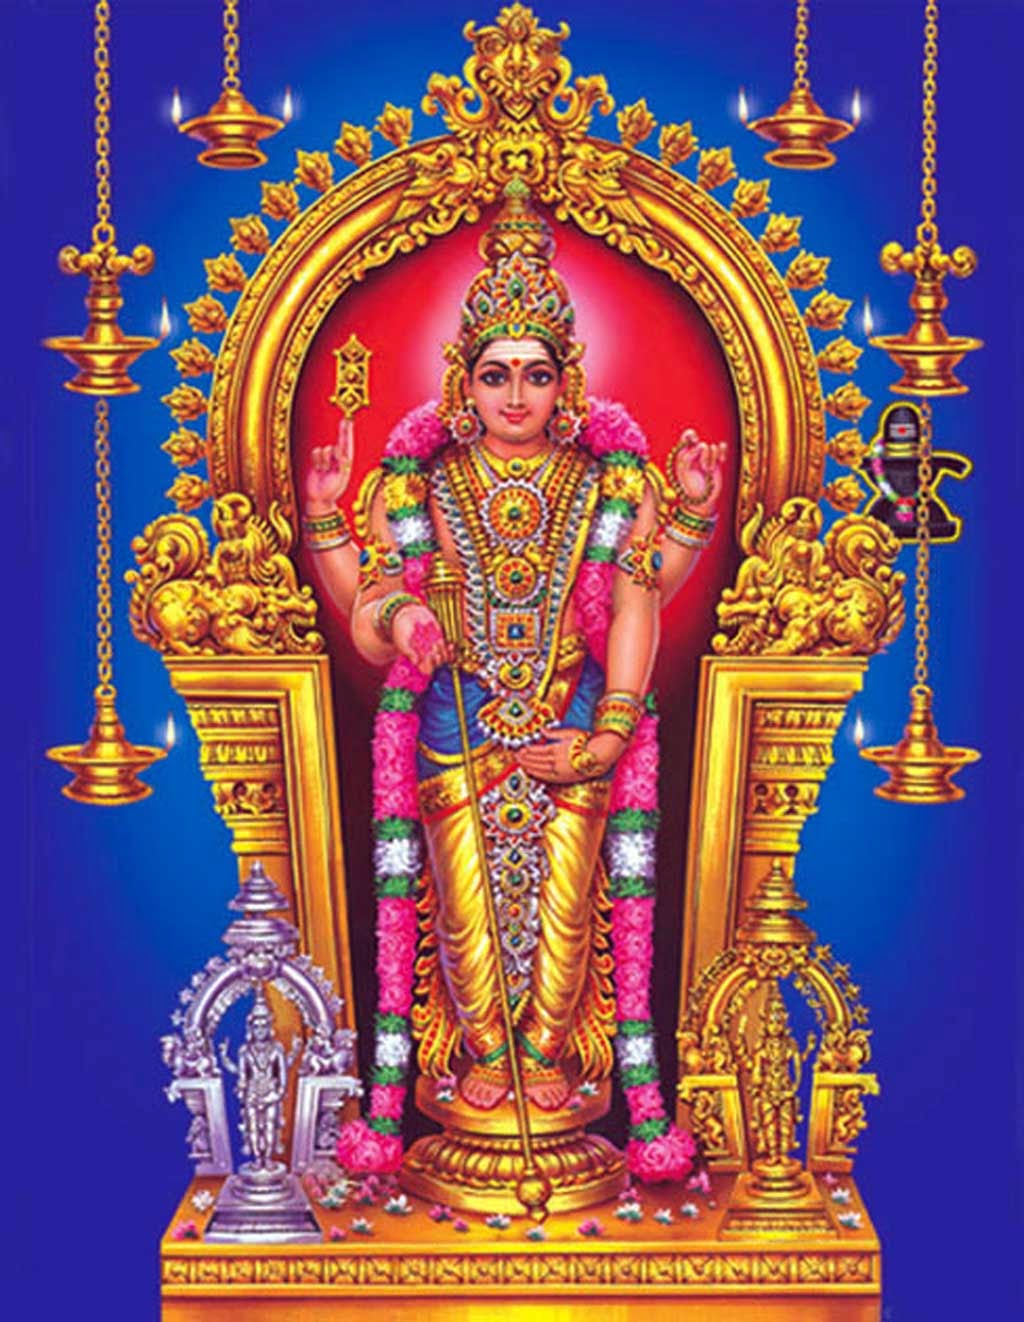 Lord Murugan Temple wallpapers HD Images Pictures photos Gallery Free  Download | Hindu God Image 